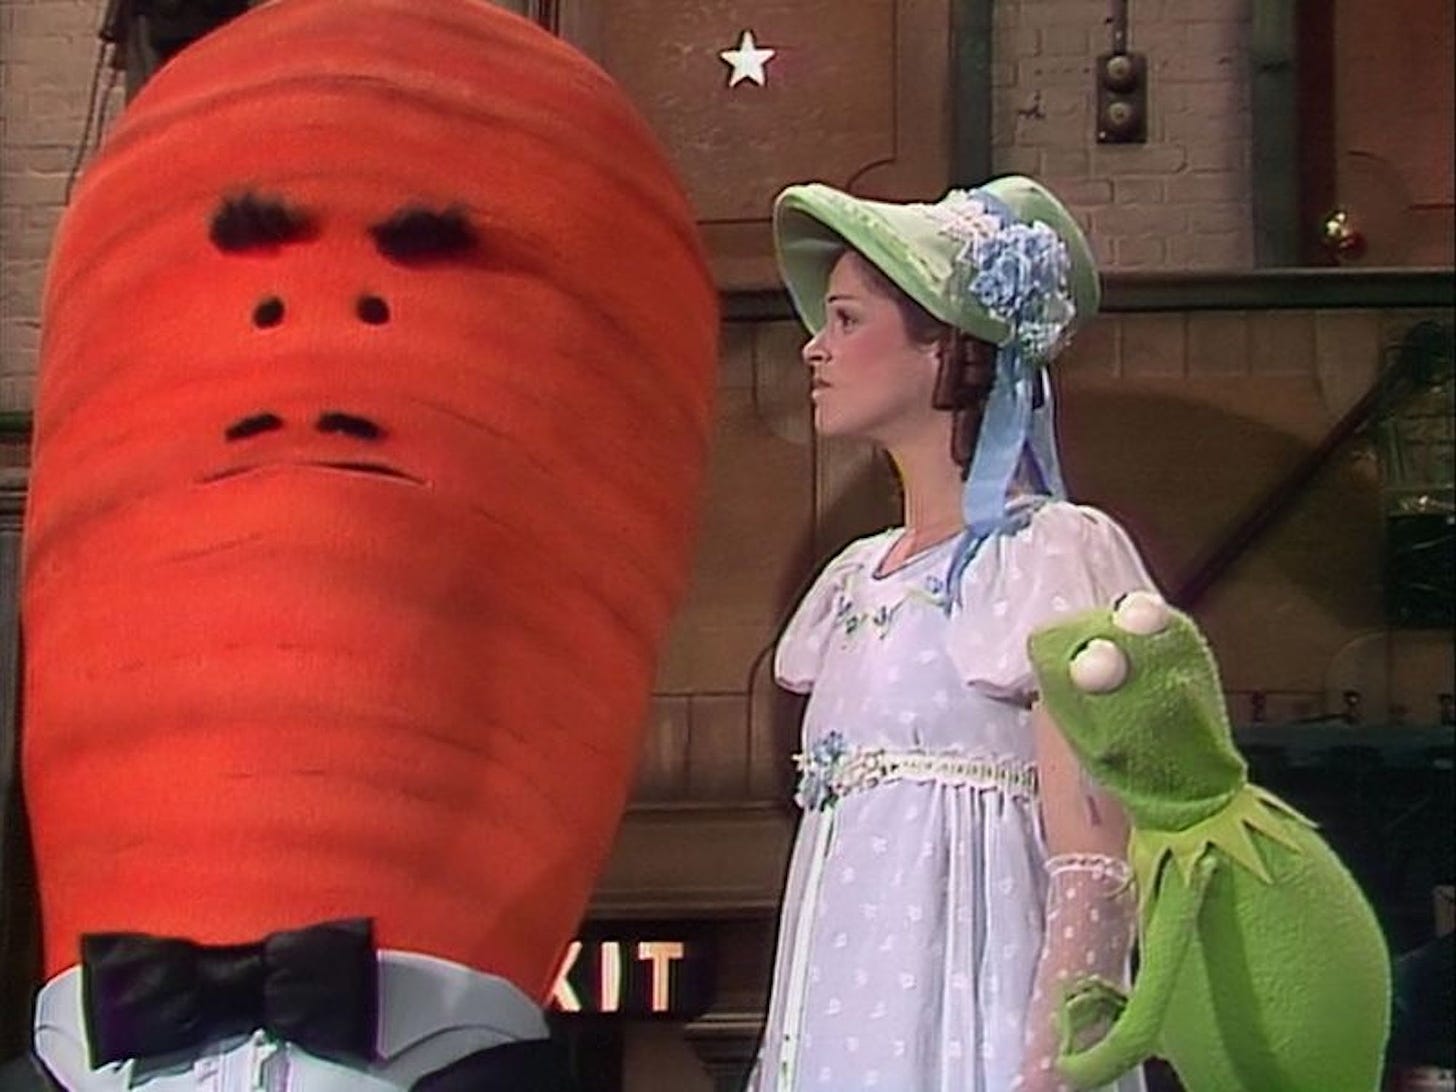 (l-r) A 7-foot-tall talking carrot in a suit, Gilda Radner, and Kermit the Frog on THE MUPPET SHOW.